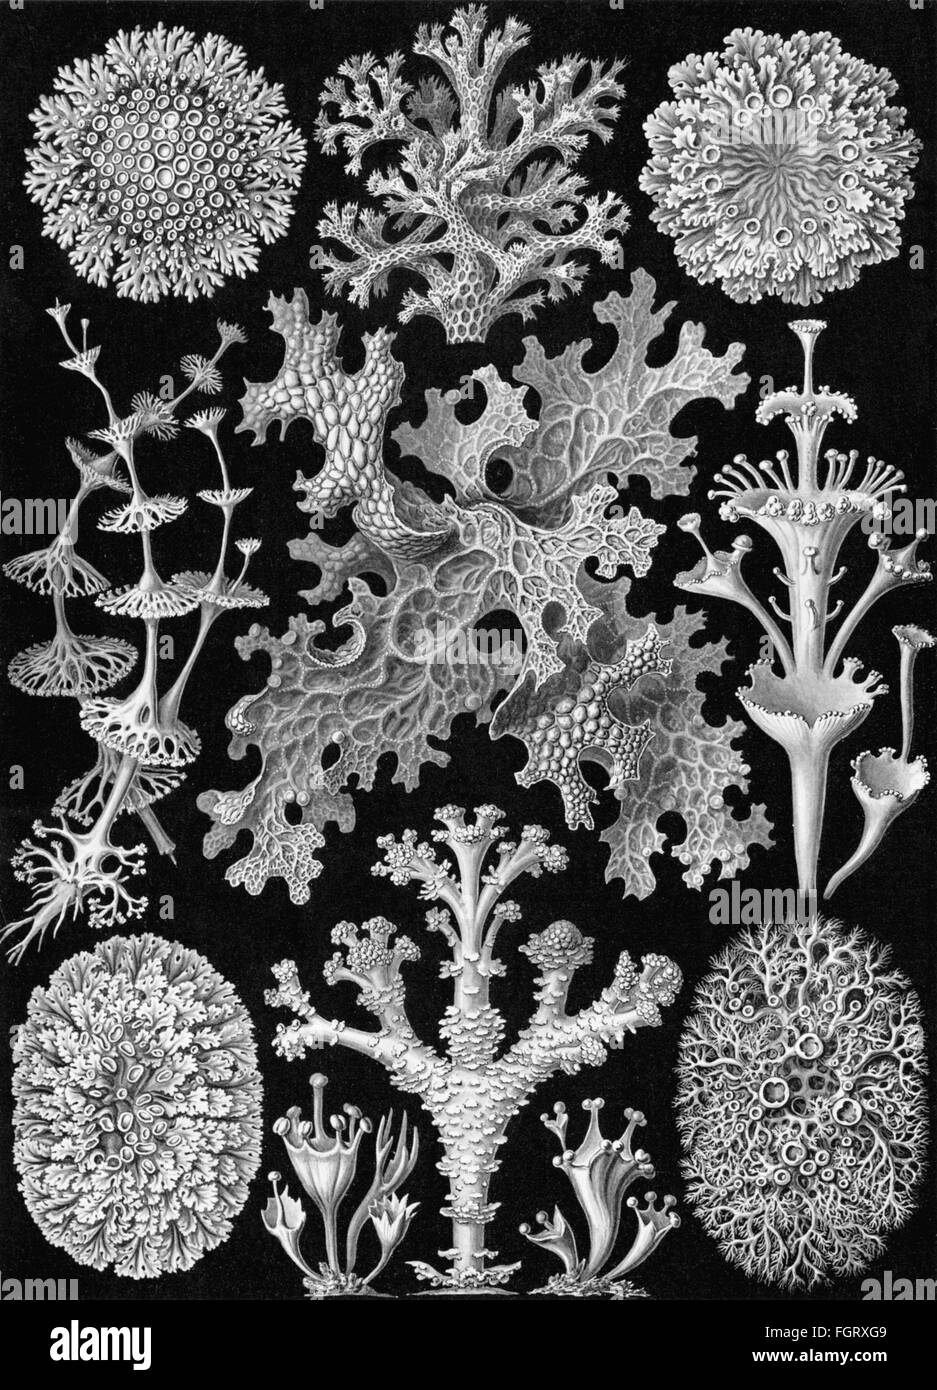 science, biology, Lichenes, Cladonia, lithograph, 'Artforms of Nature' ('Kunstformen der Natur') by Ernst Haeckel, 1899 - 1904, Additional-Rights-Clearences-Not Available Stock Photo